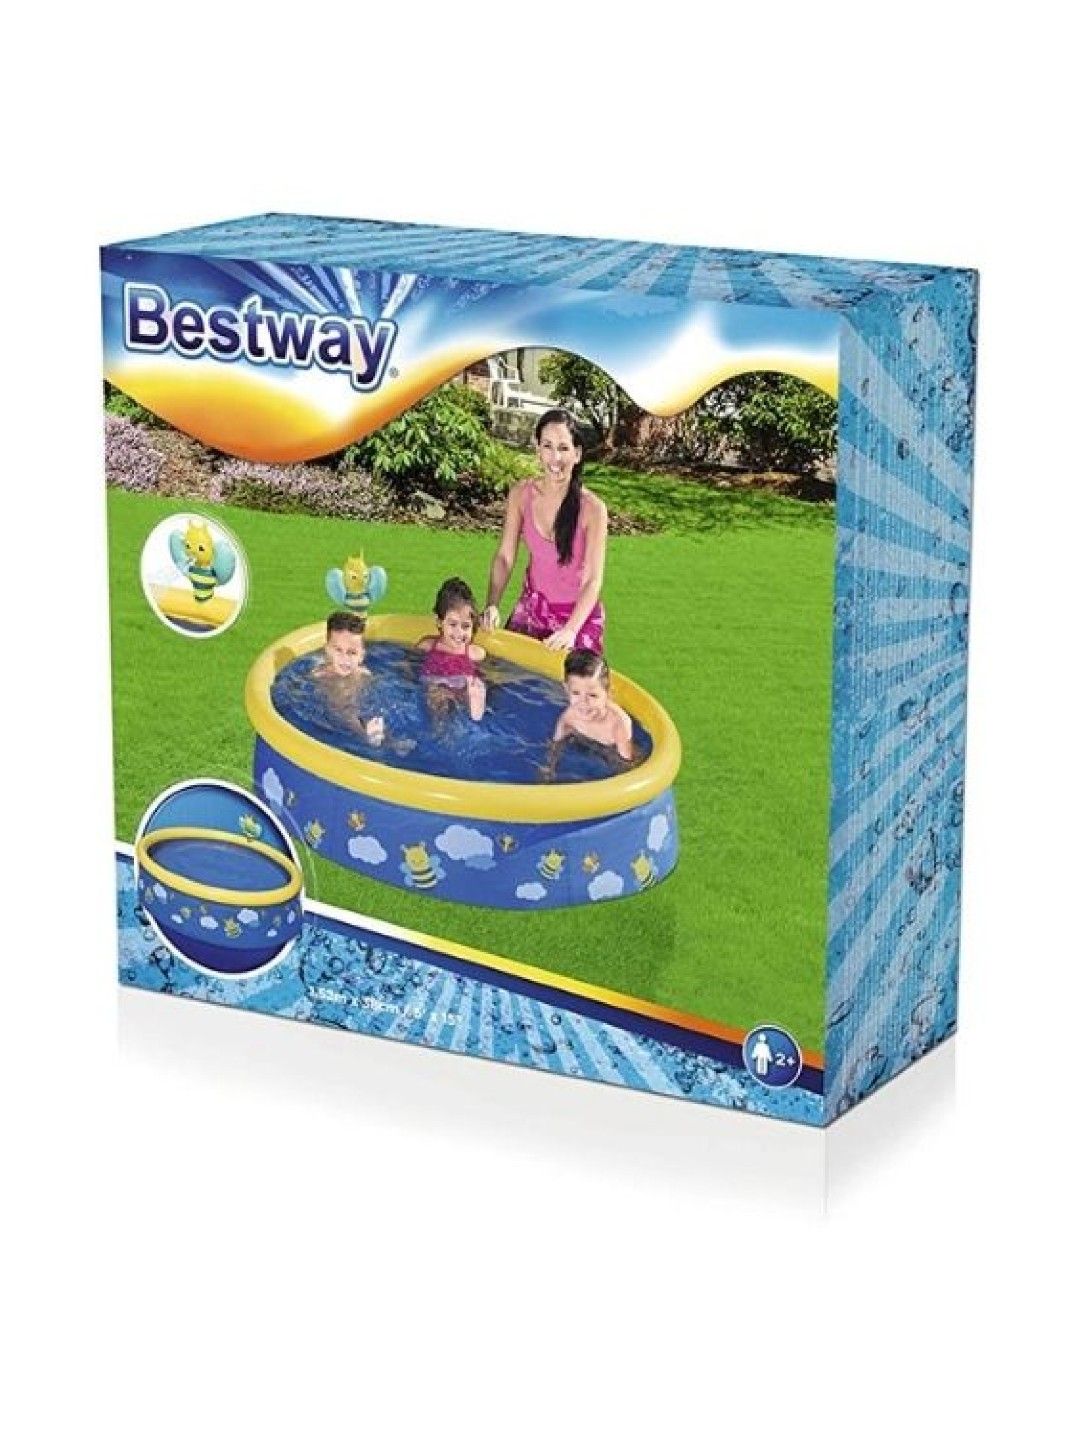 Bestway My First Fast Set Spray Pool (No Color- Image 3)